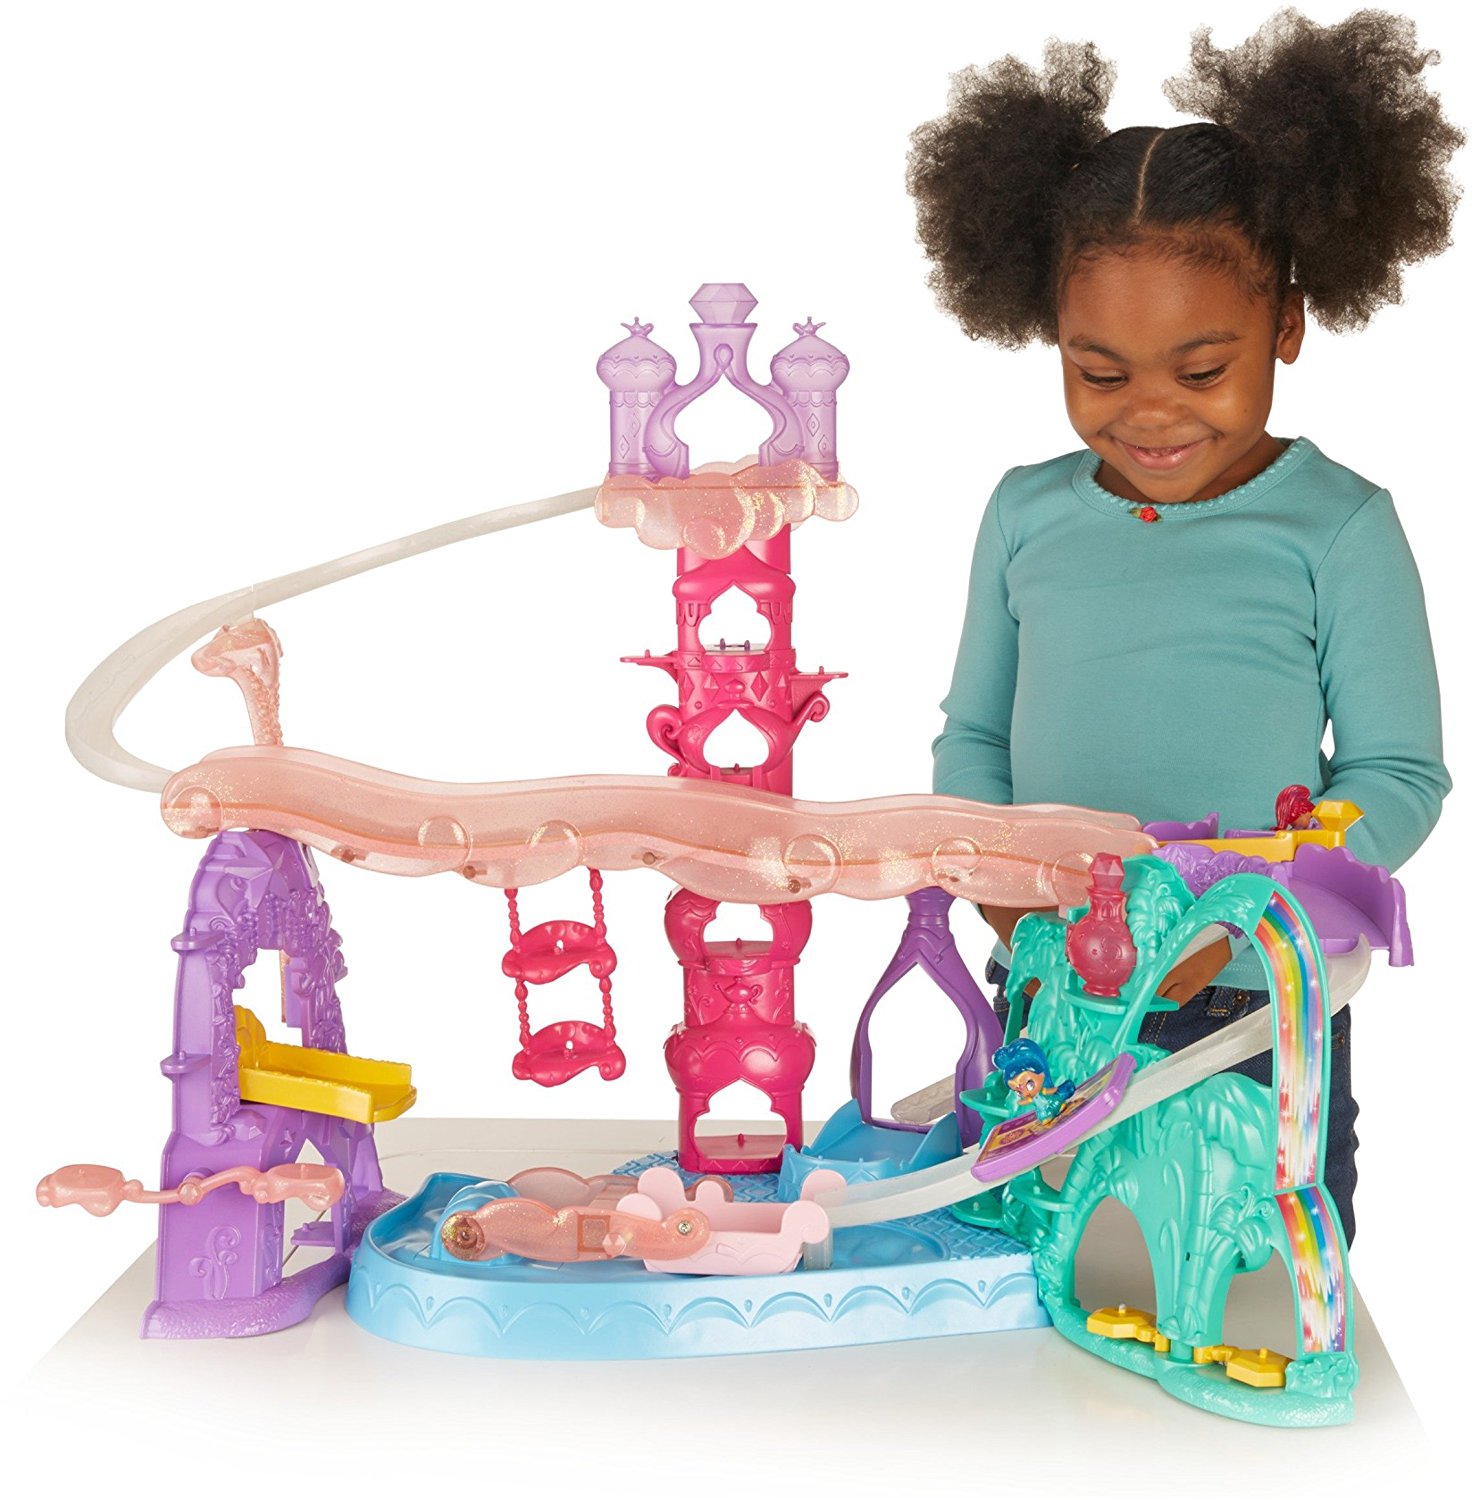 Fisher-Price Nickelodeon Shimmer & Shine Zahramay Falls Playset Only $26.97 Shipped!